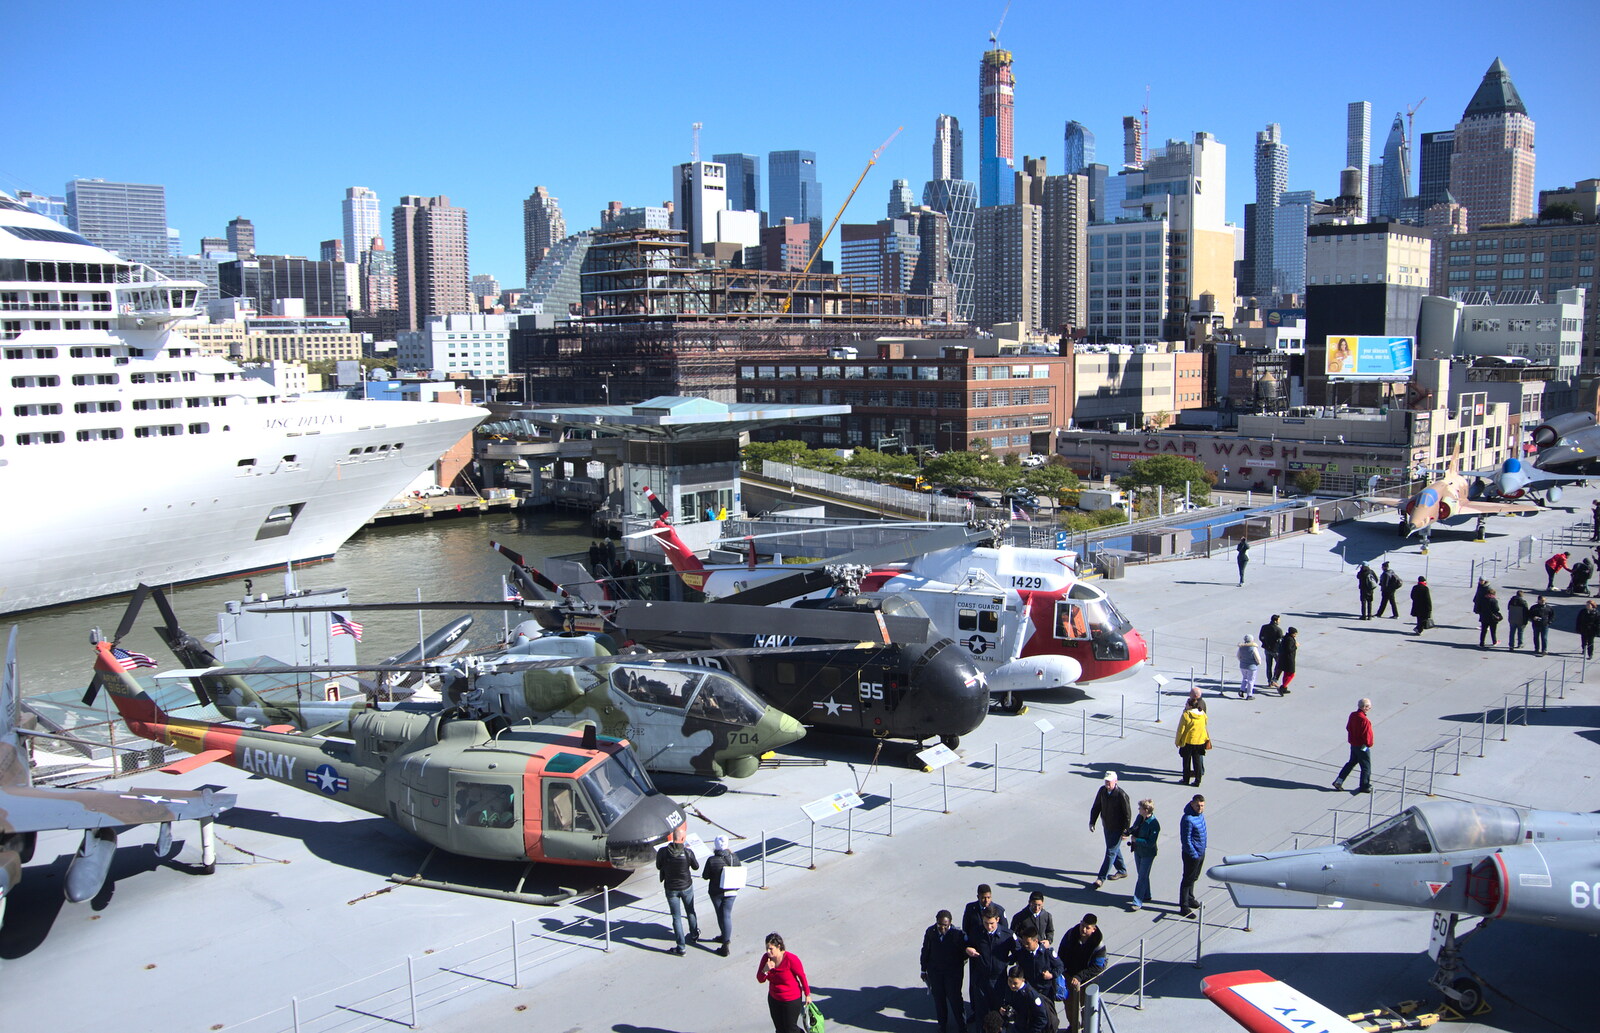 A collection of aircraft on the deck from Times Square, USS Intrepid and the High Line, Manhattan, New York - 25th October 2018